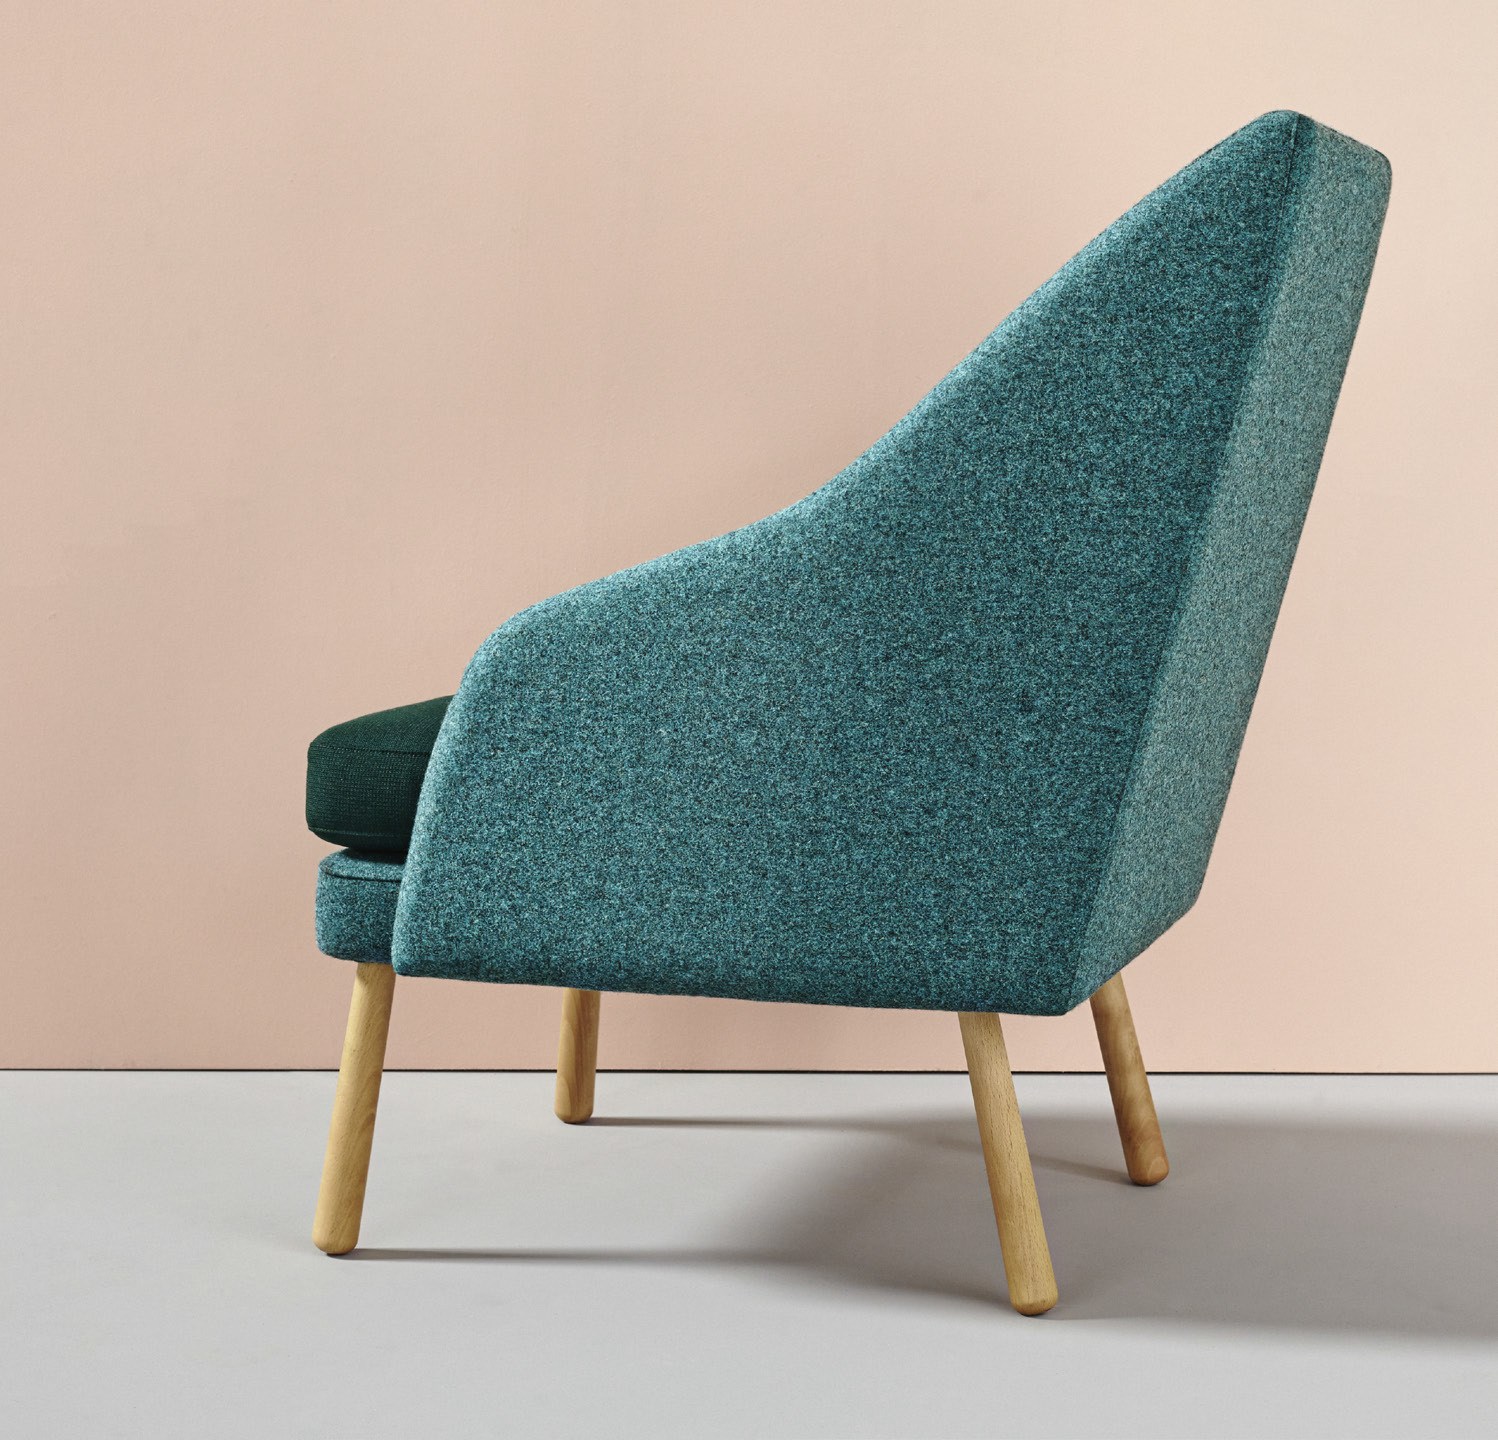 Mamut Armchair by TOTPOC for Missana